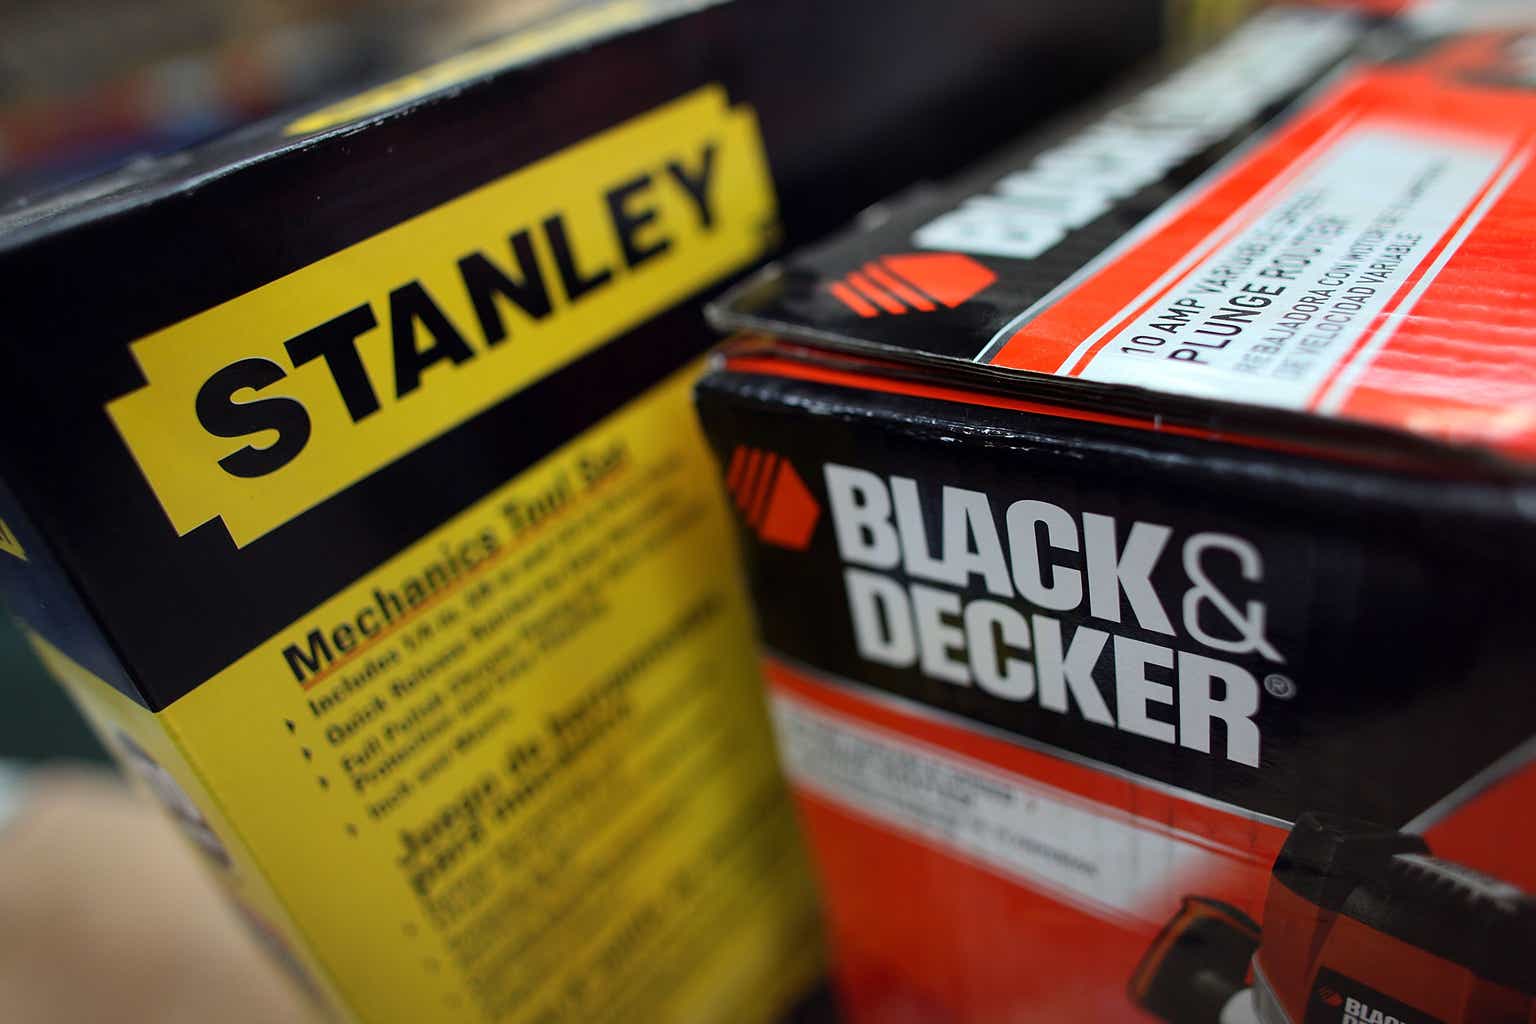 Stanley Black & Decker: Remains A Hold Despite Persistent Innovation (NYSE:SWK)